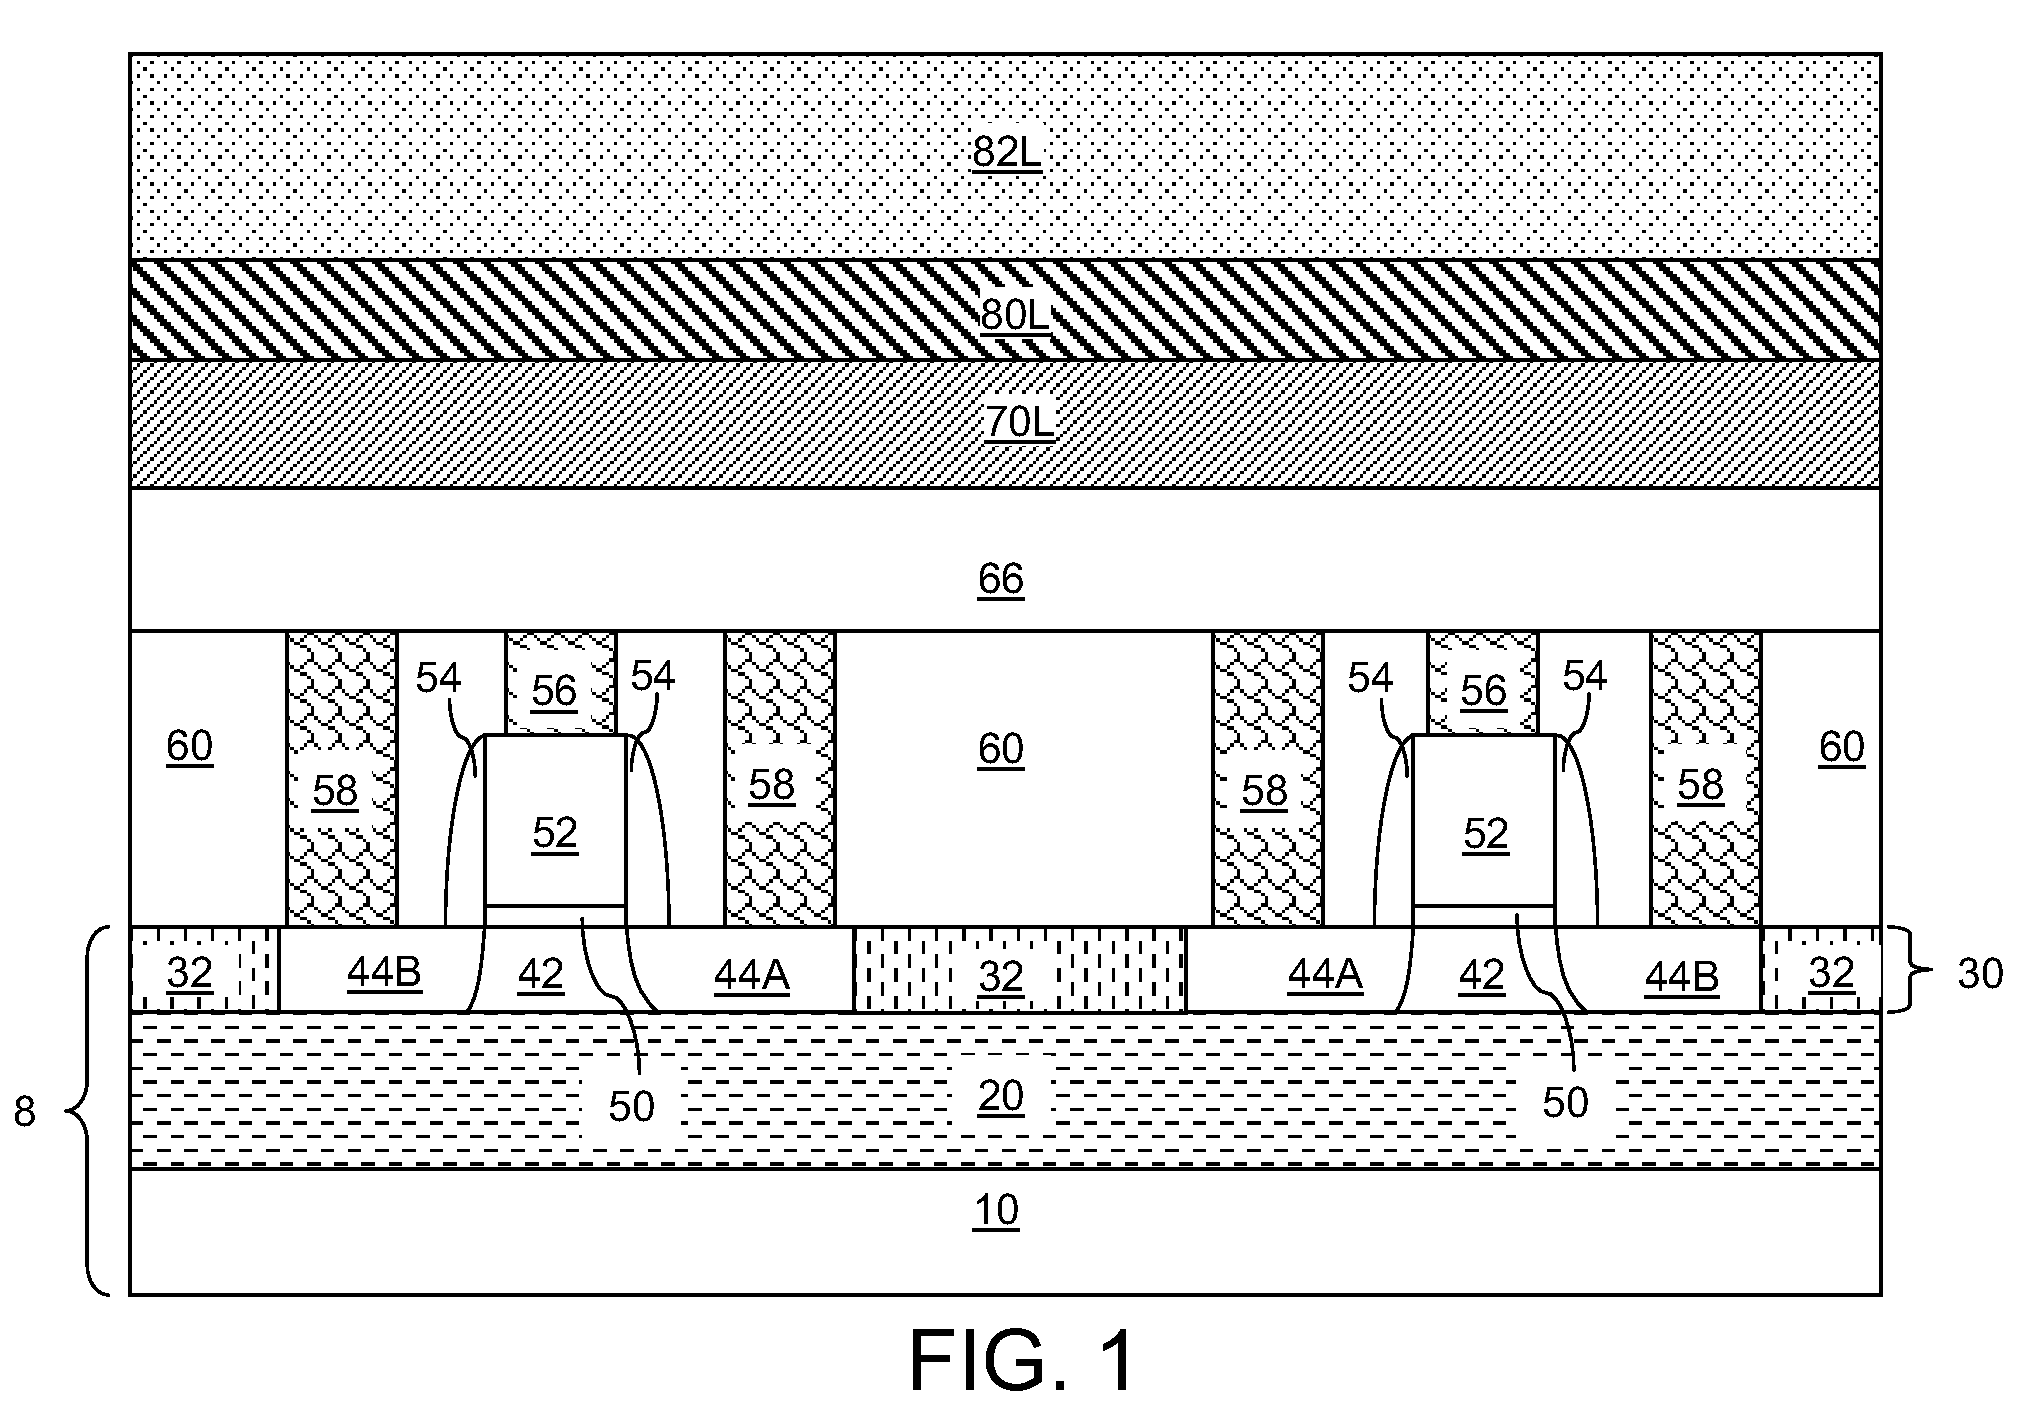 Multi-exposure lithography employing a single Anti-reflective coating layer